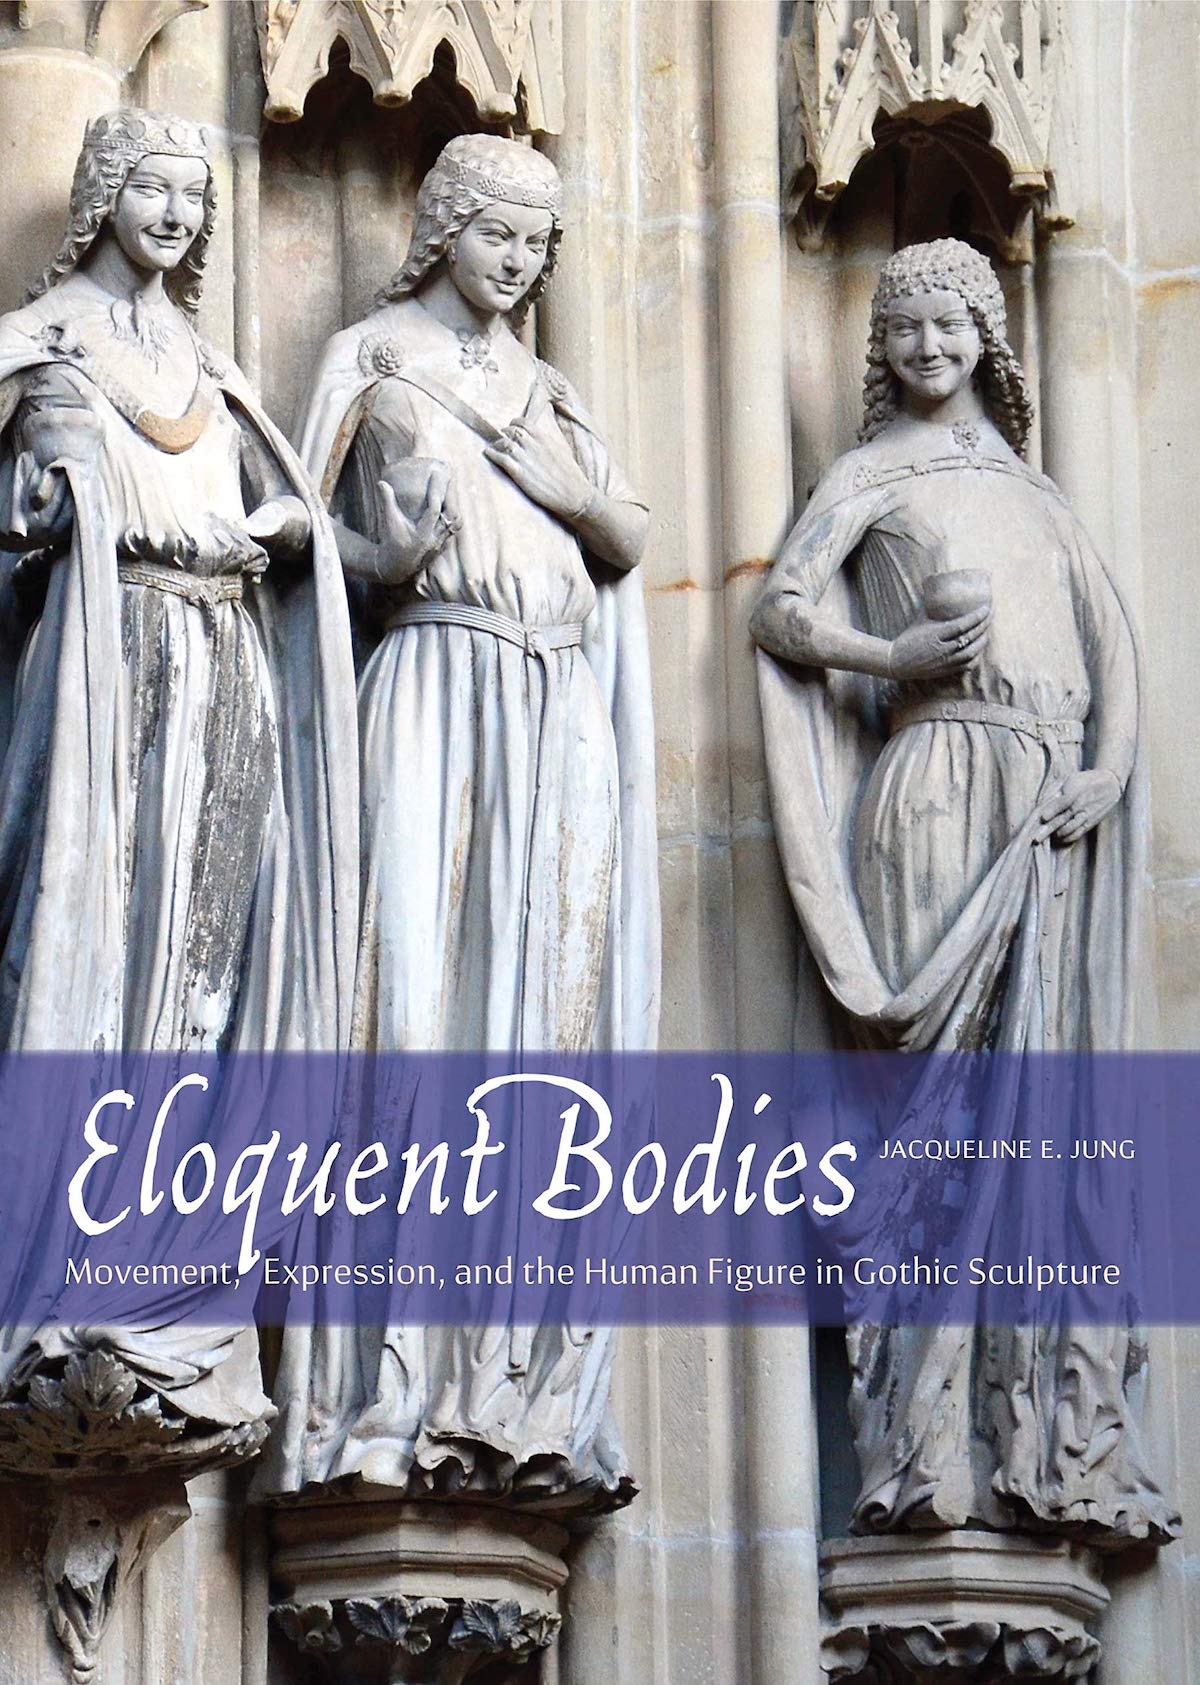 Jacqueline Jung, Eloquent Bodies: Movement, Expression and the Human Figure in Gothic Sculpture, Yale University Press, July 2020, 340pp